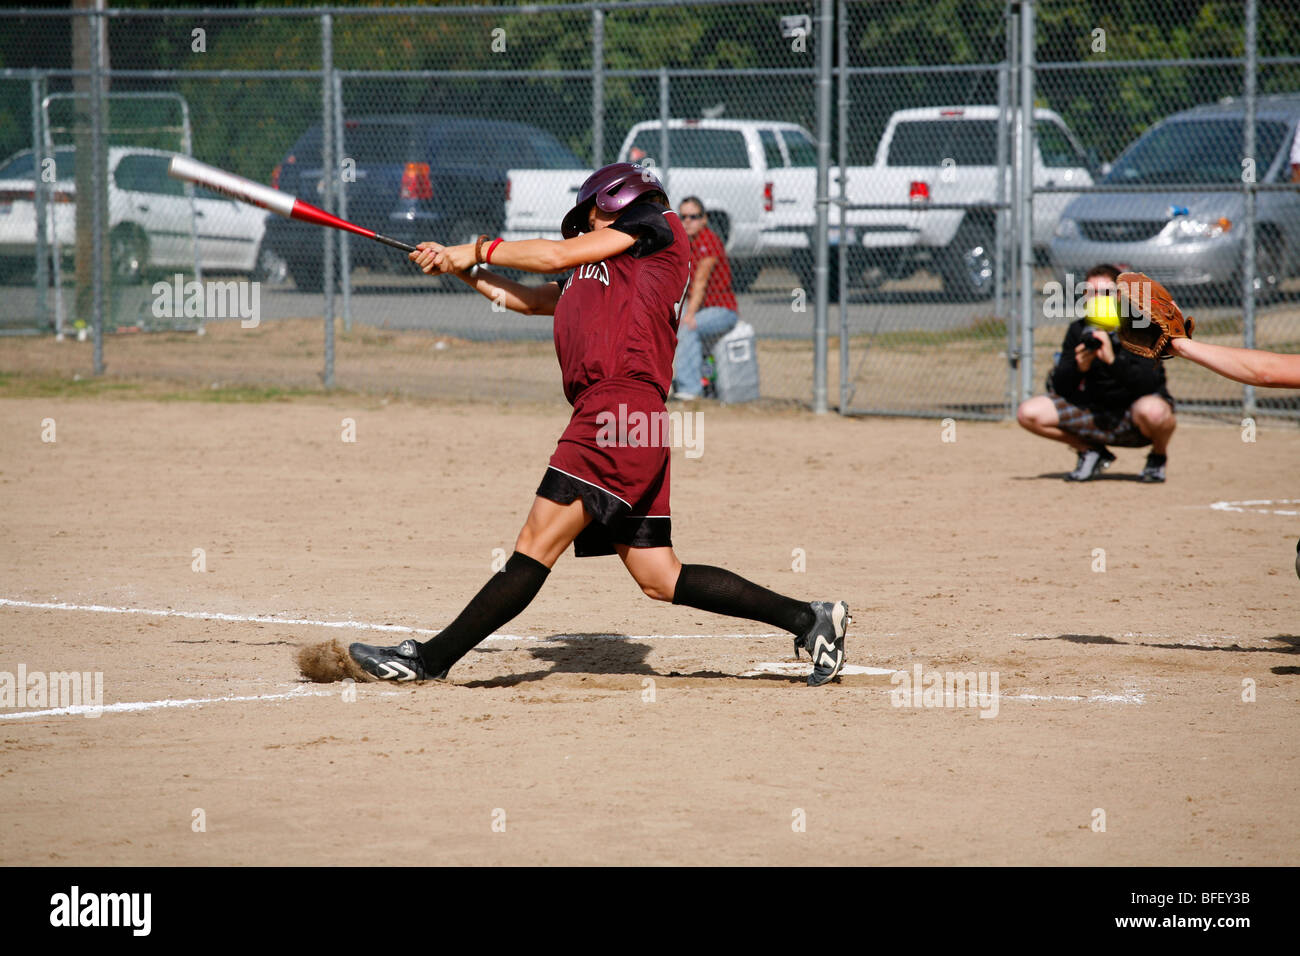 North Idaho College softball game, Sept. 28, 2008, Coeur D Alene, Idaho. Batter swinging and missing the pitch. Stock Photo